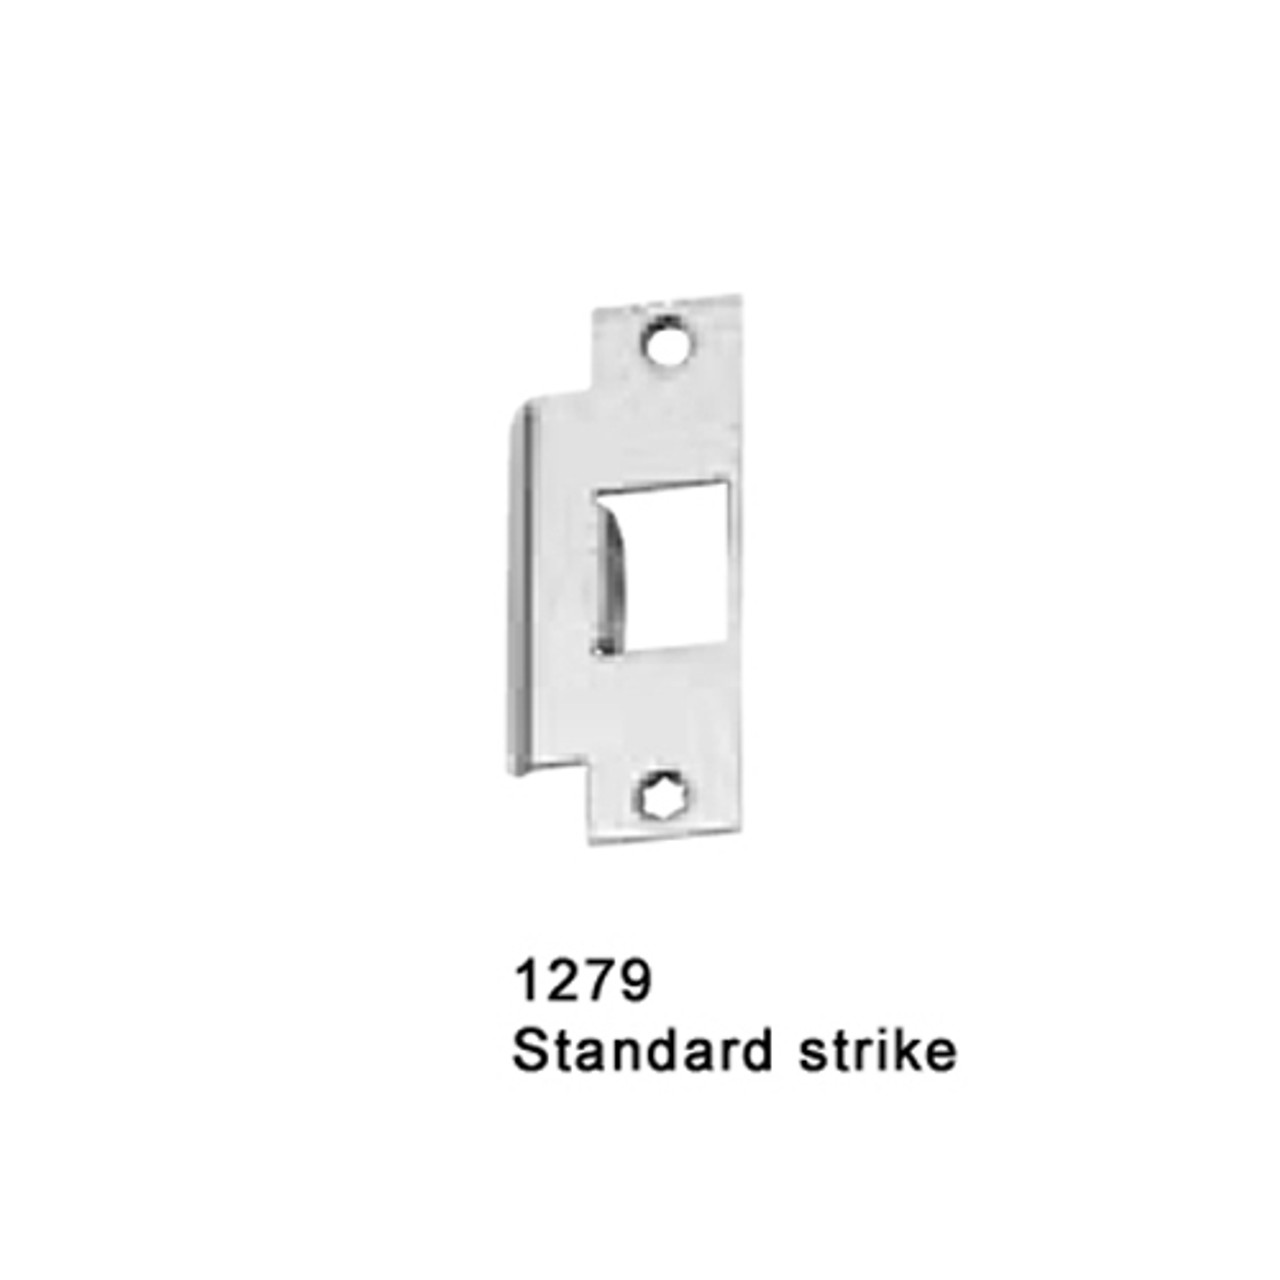 CD25-M-L-BE-DANE-US19-3-LHR Falcon 25 Series Mortise Lock Devices 510L-BE Dane Lever Trim with Blank Escutcheon in Flat Black Painted